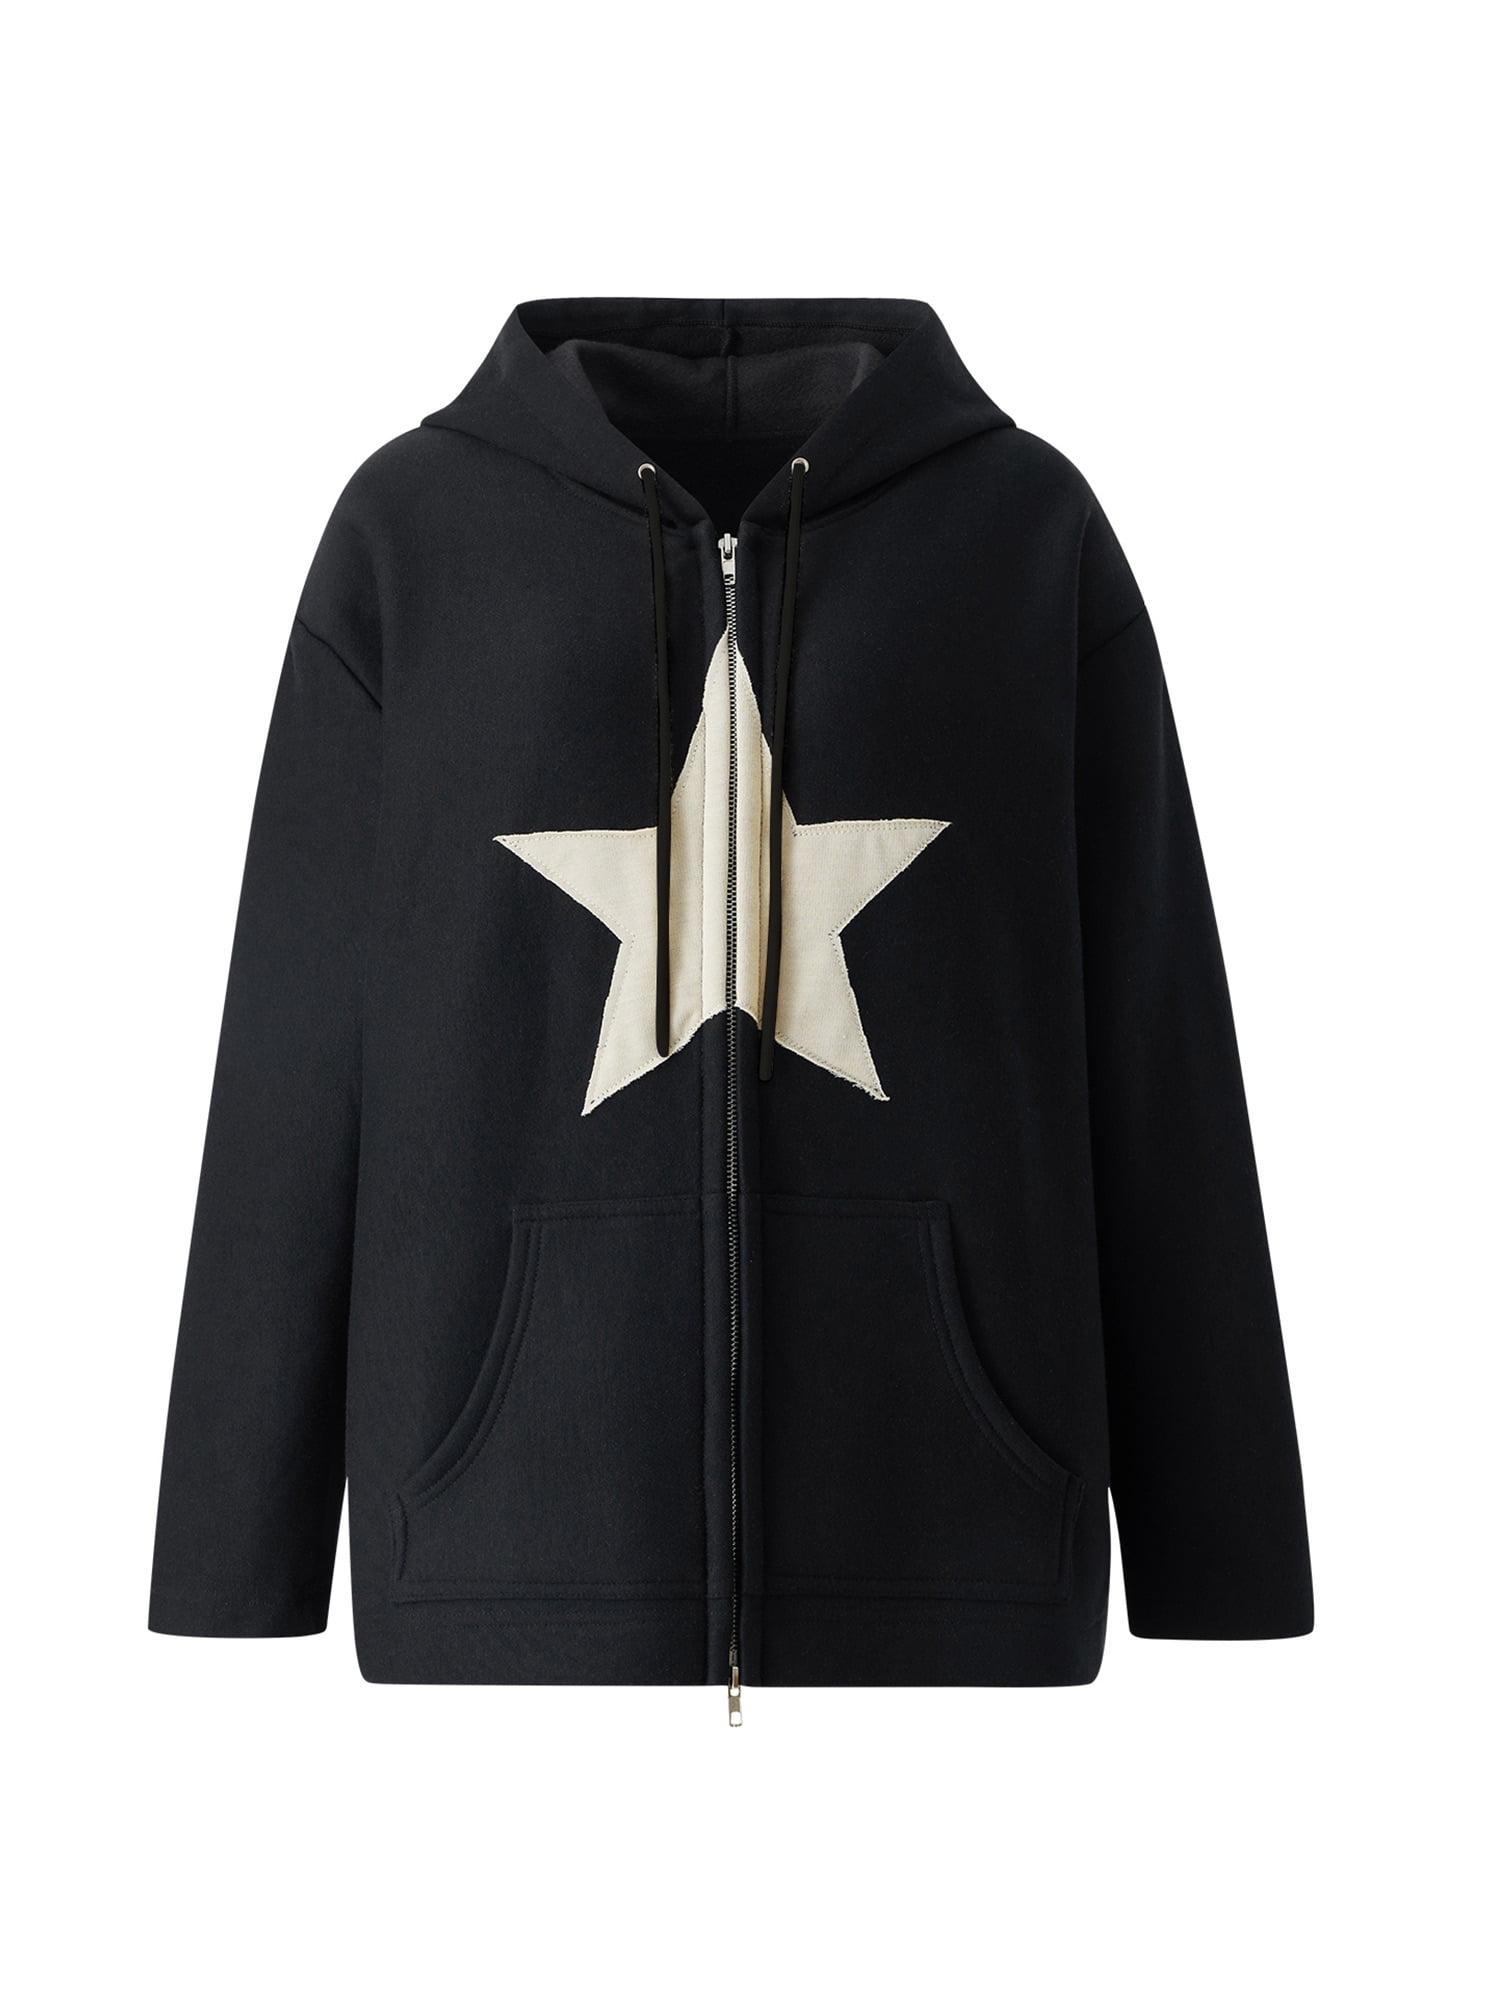 JYYYBF Women's Casual Star Patched Graphic Printed Hoodies 